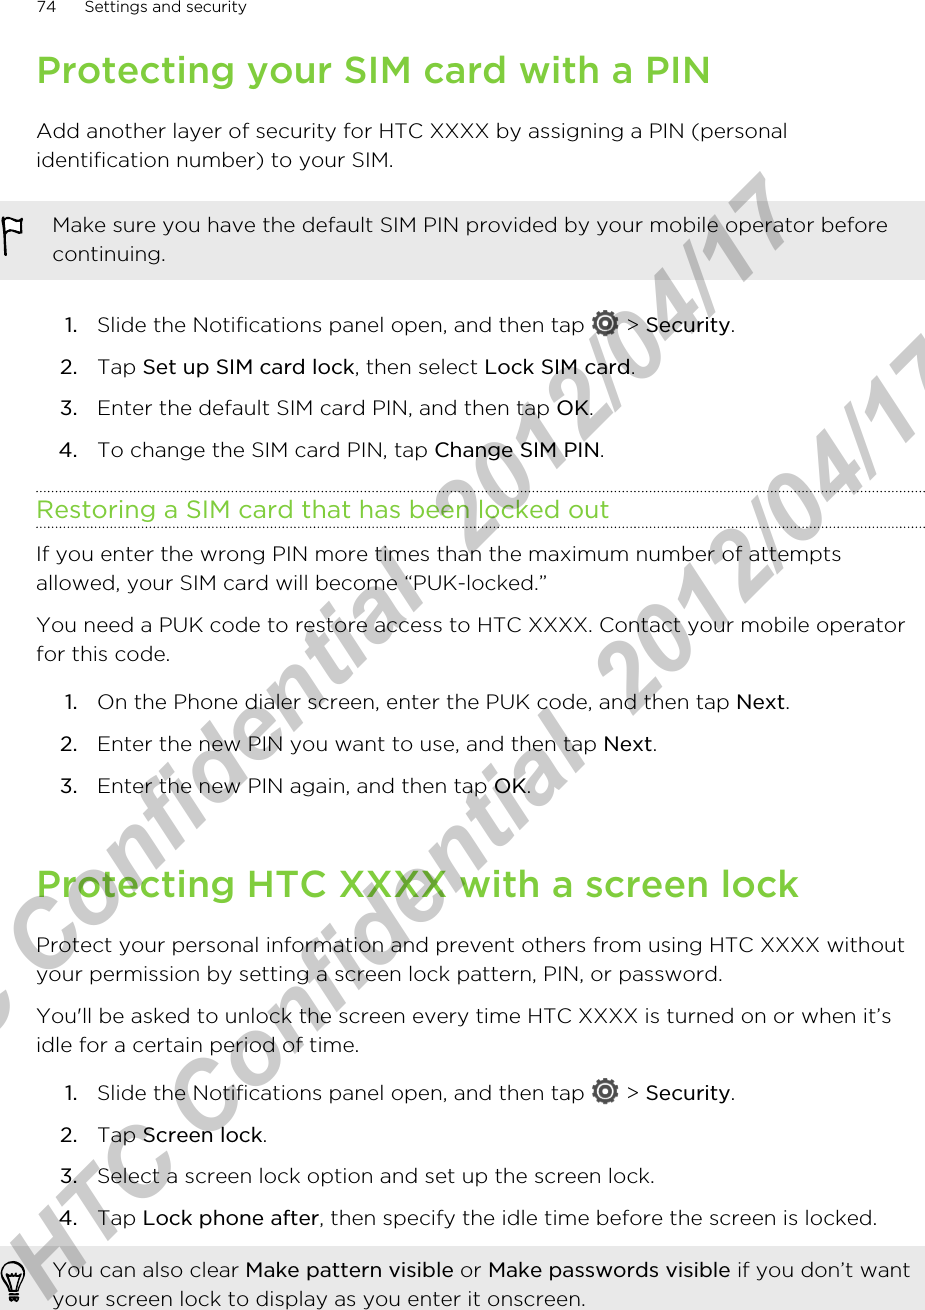 Protecting your SIM card with a PINAdd another layer of security for HTC XXXX by assigning a PIN (personalidentification number) to your SIM.Make sure you have the default SIM PIN provided by your mobile operator beforecontinuing.1. Slide the Notifications panel open, and then tap   &gt; Security.2. Tap Set up SIM card lock, then select Lock SIM card.3. Enter the default SIM card PIN, and then tap OK.4. To change the SIM card PIN, tap Change SIM PIN.Restoring a SIM card that has been locked outIf you enter the wrong PIN more times than the maximum number of attemptsallowed, your SIM card will become “PUK-locked.”You need a PUK code to restore access to HTC XXXX. Contact your mobile operatorfor this code.1. On the Phone dialer screen, enter the PUK code, and then tap Next.2. Enter the new PIN you want to use, and then tap Next.3. Enter the new PIN again, and then tap OK.Protecting HTC XXXX with a screen lockProtect your personal information and prevent others from using HTC XXXX withoutyour permission by setting a screen lock pattern, PIN, or password.You&apos;ll be asked to unlock the screen every time HTC XXXX is turned on or when it’sidle for a certain period of time.1. Slide the Notifications panel open, and then tap   &gt; Security.2. Tap Screen lock.3. Select a screen lock option and set up the screen lock.4. Tap Lock phone after, then specify the idle time before the screen is locked. You can also clear Make pattern visible or Make passwords visible if you don’t wantyour screen lock to display as you enter it onscreen.74 Settings and securityHTC Confidential  2012/04/17  HTC Confidential  2012/04/17 